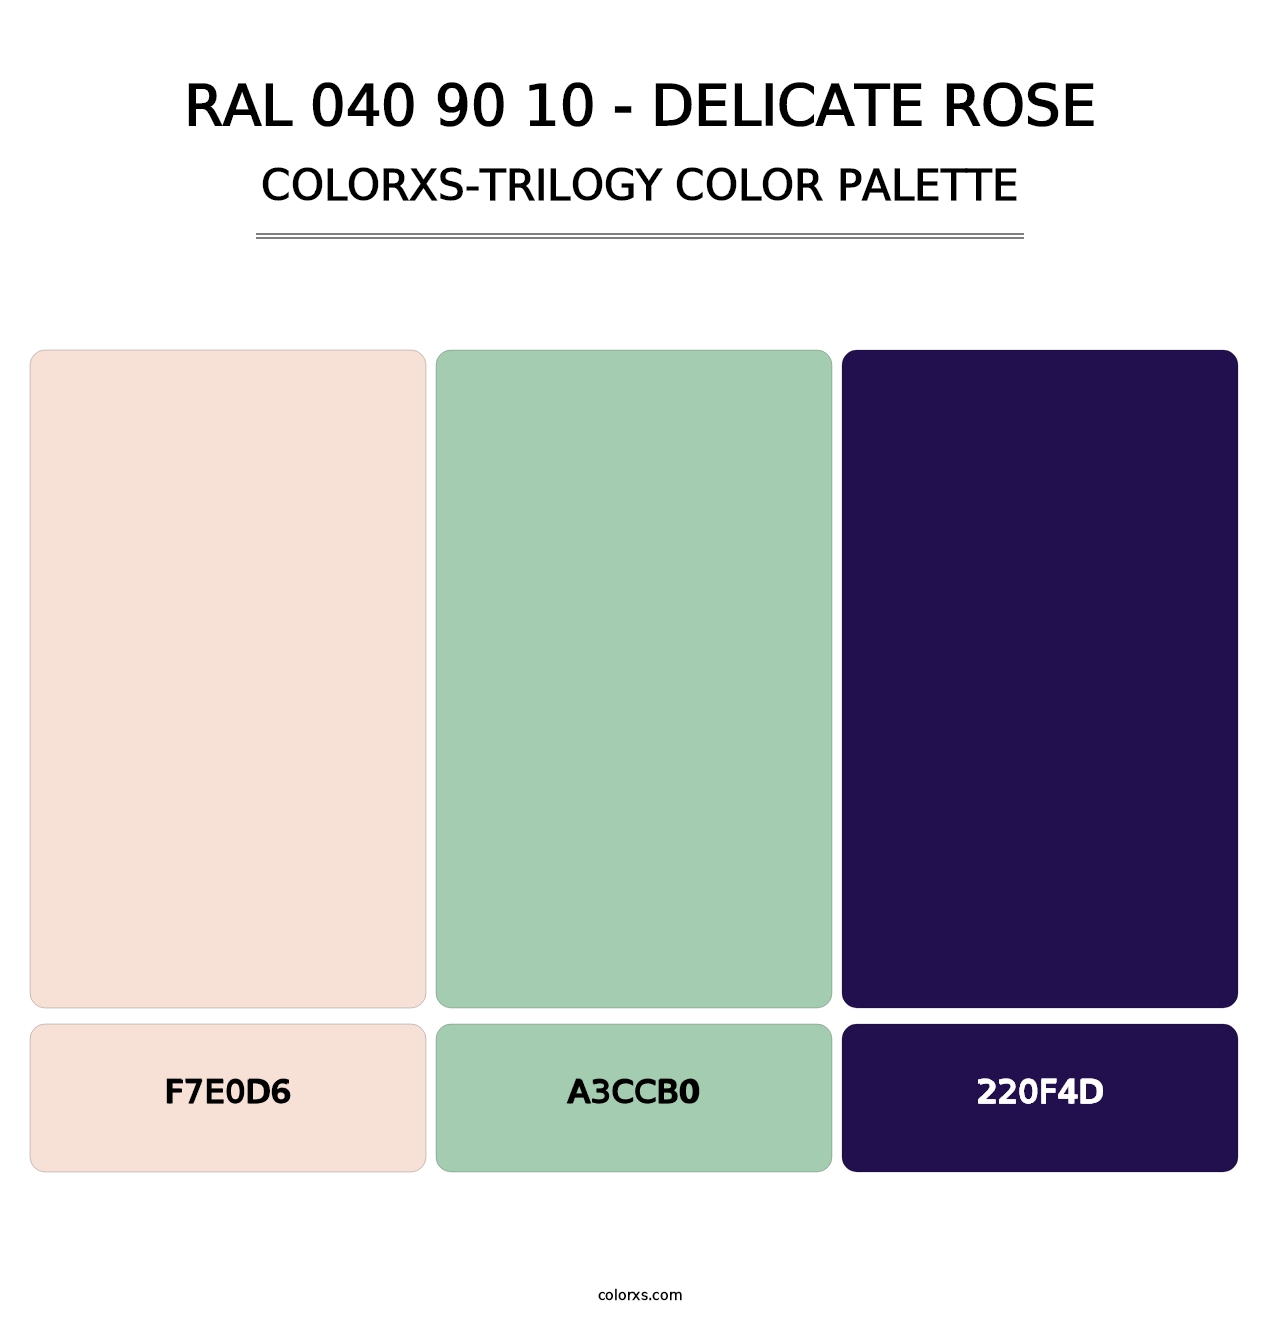 RAL 040 90 10 - Delicate Rose - Colorxs Trilogy Palette